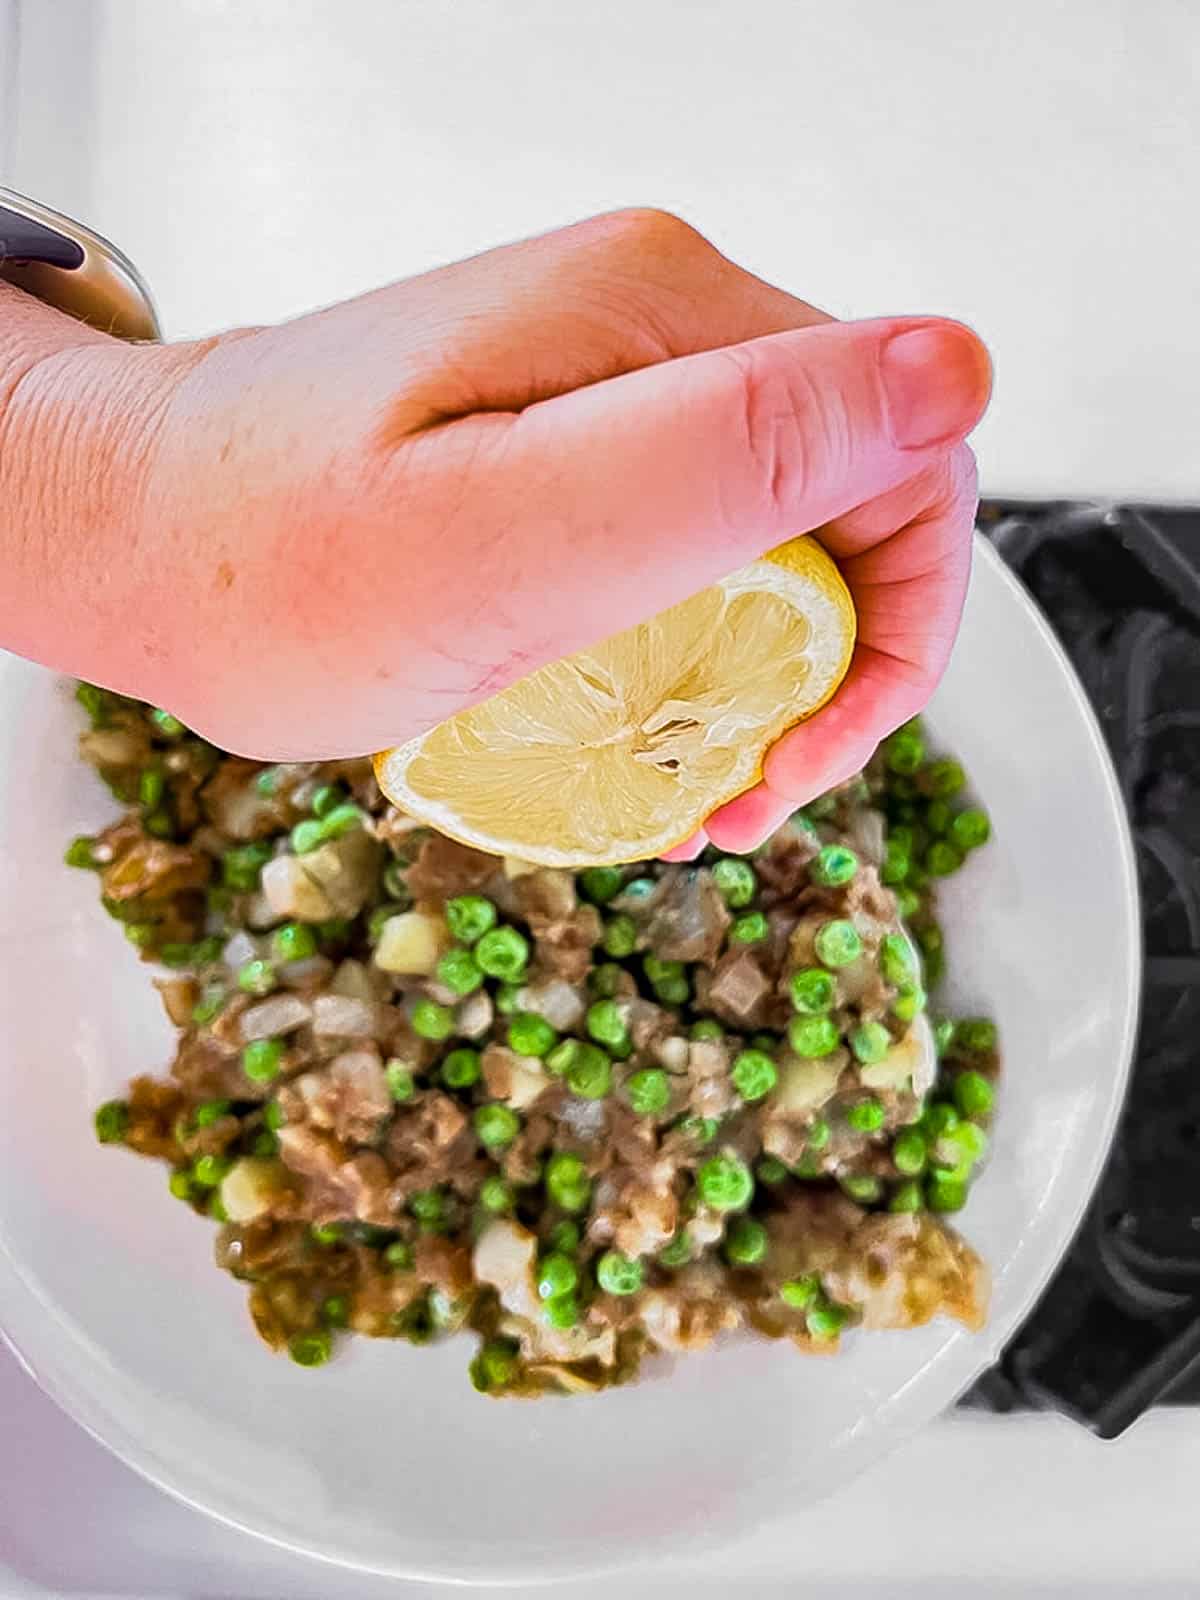 A person garnishing a plate of peas with freshly squeezed lemon juice.